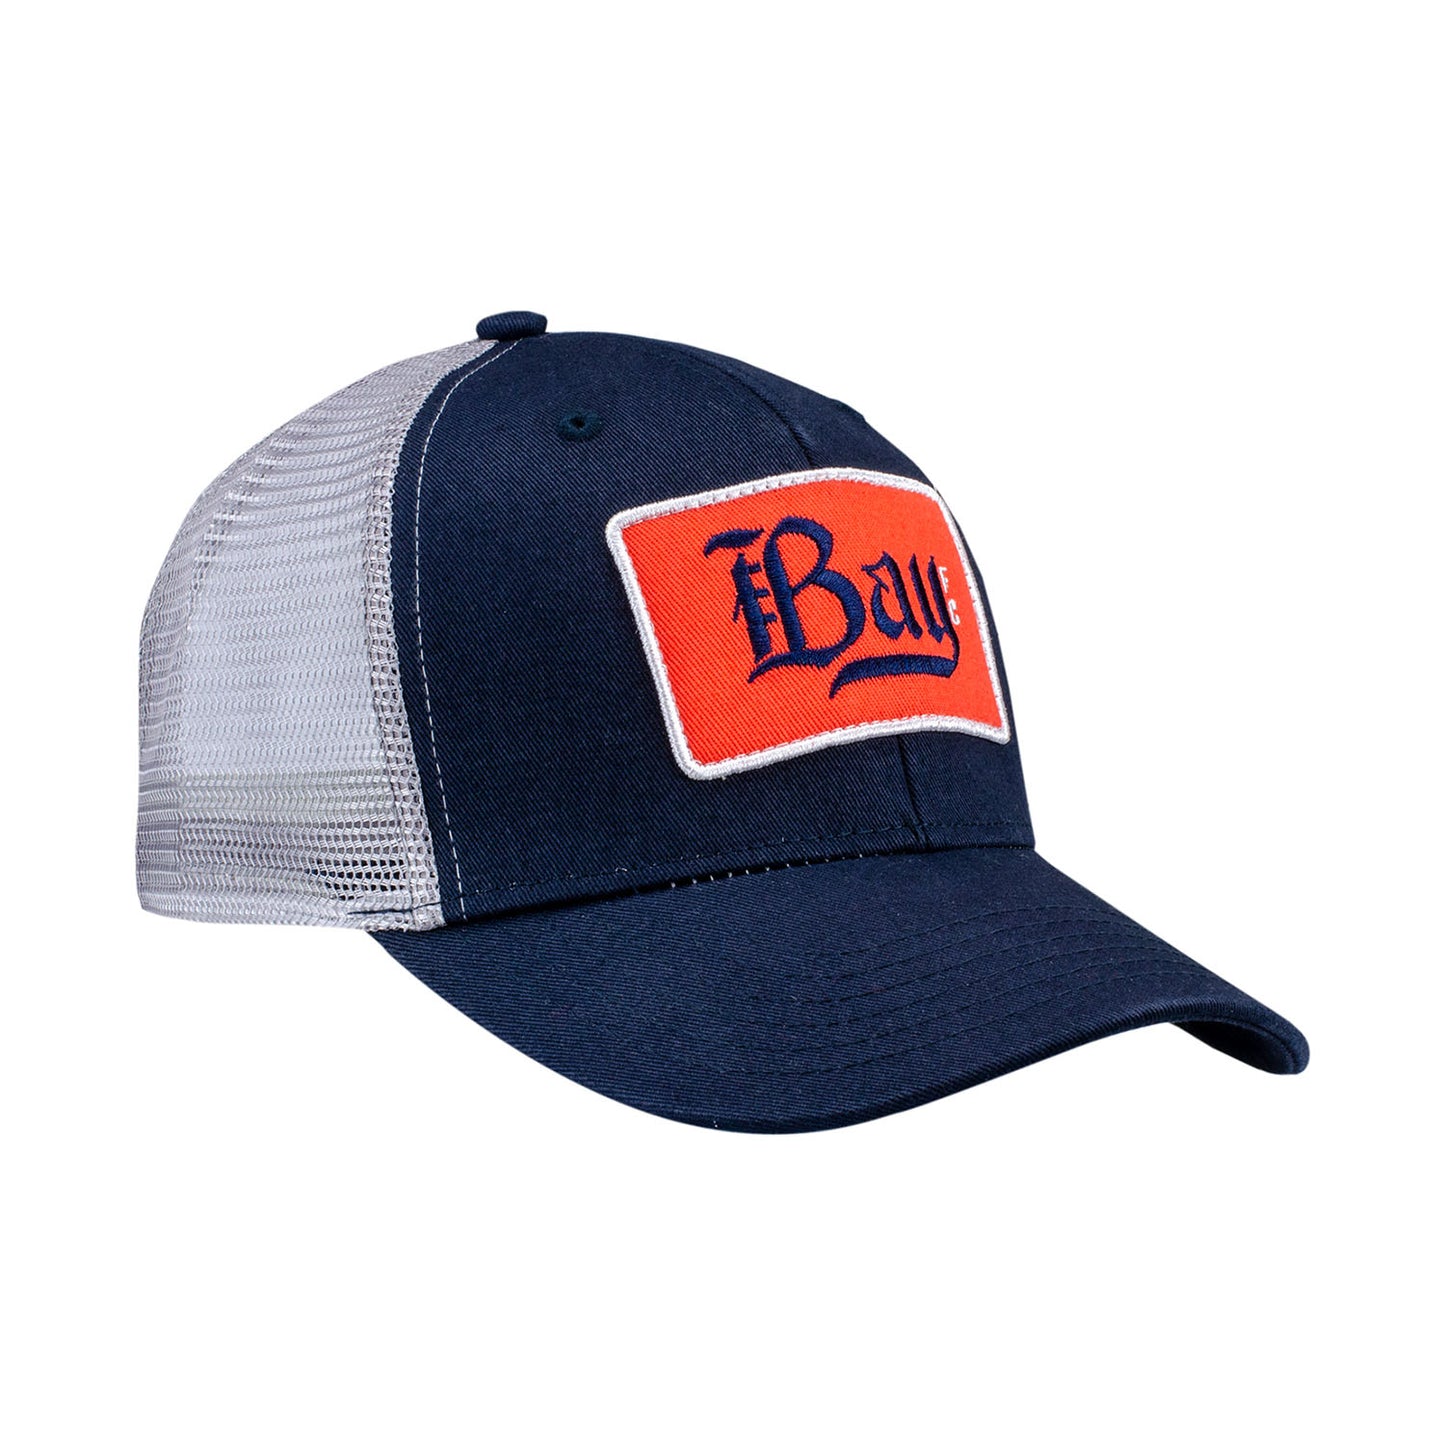 Adult Die Hard Bay FC Navy Hat - Angled Right Side View